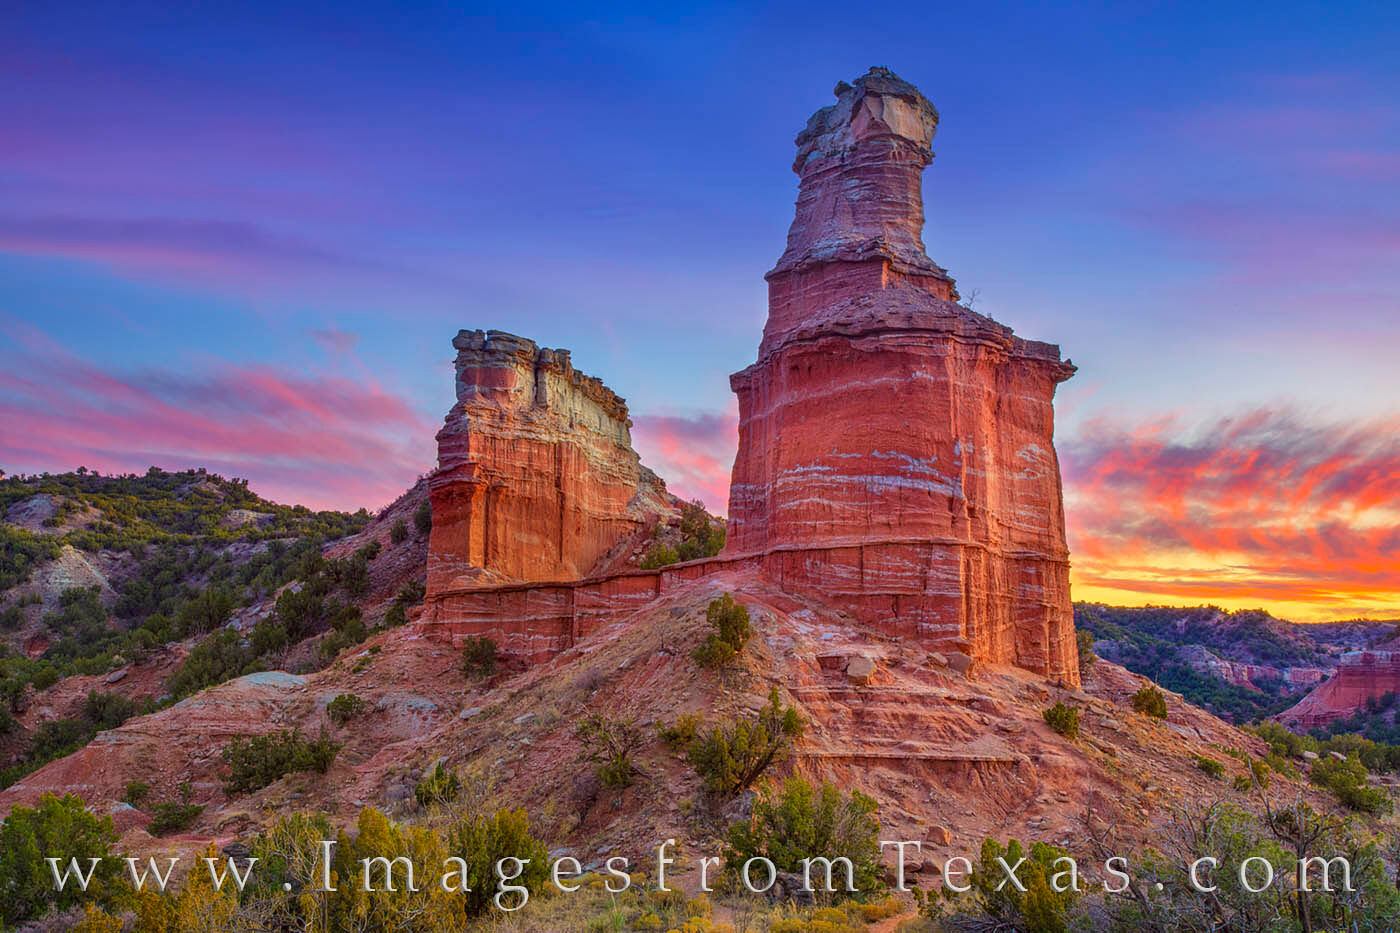 A beautfiul sunset highlights this iconic rock formation in Palo Duro Canyon. As the payoff of an easy 3 mile walk, the Lighthouse...